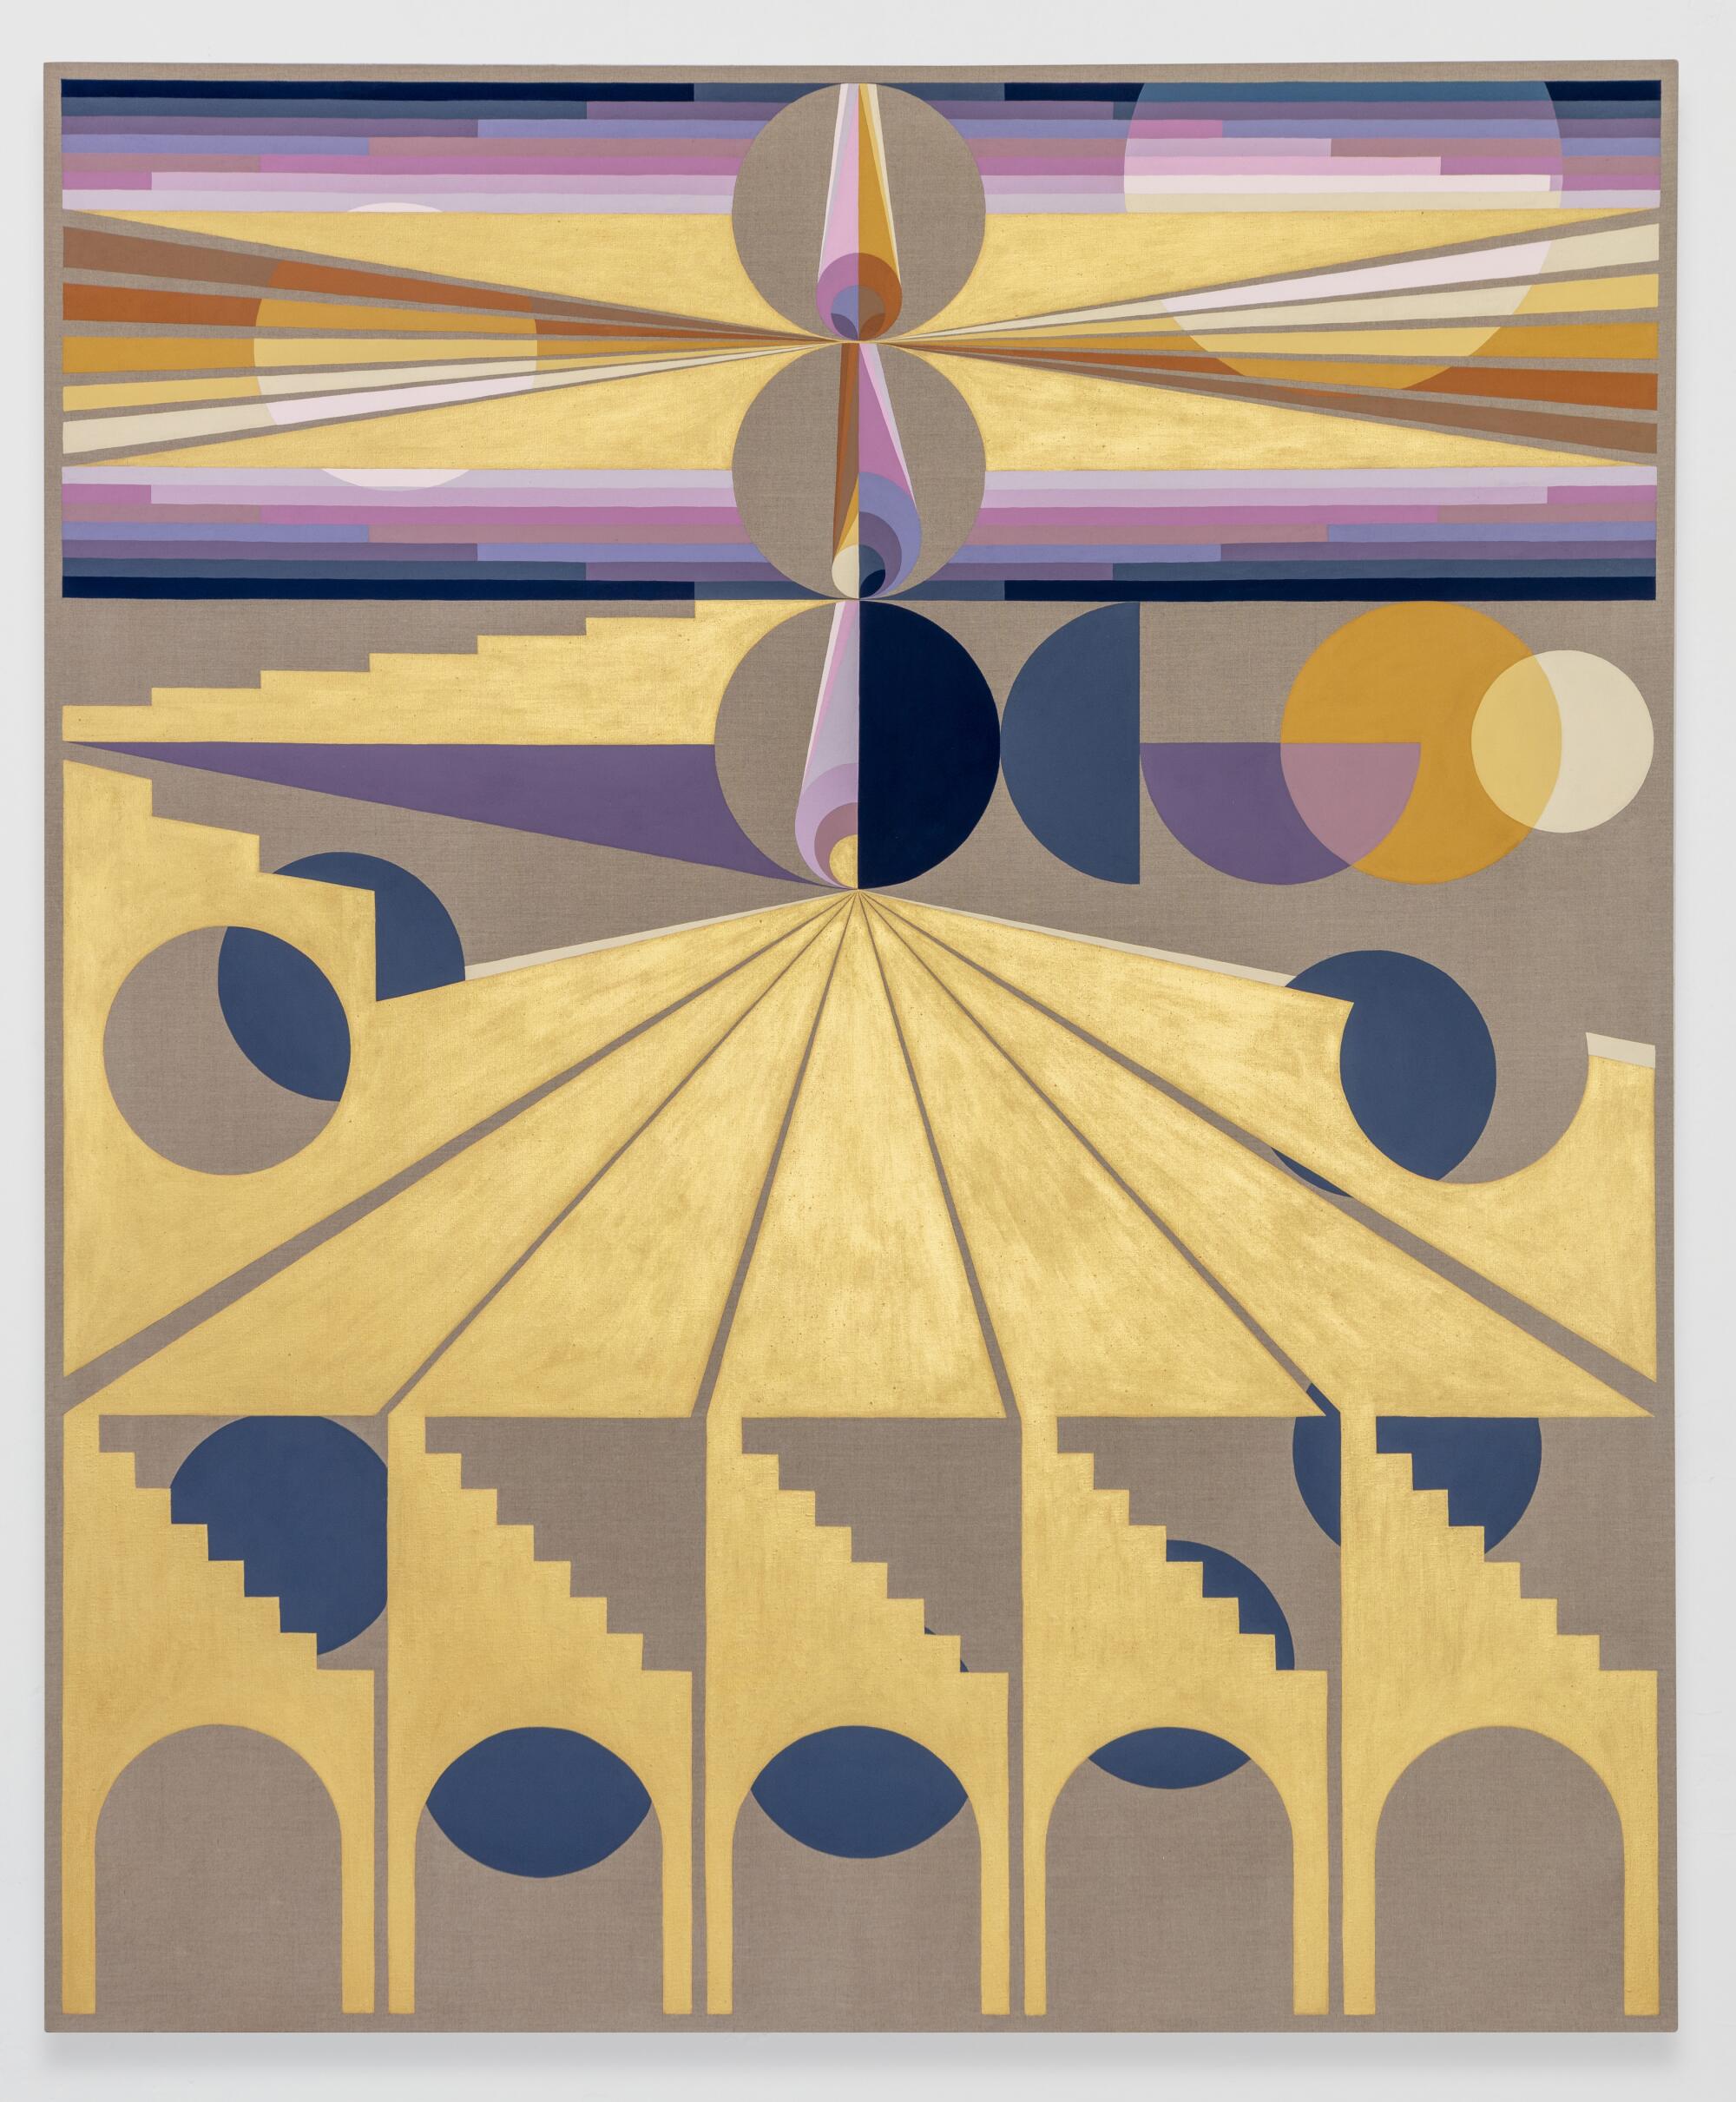 A vertical canvas shows repeating architectonic patterns of arches and steps over patterns of circles and rays of color